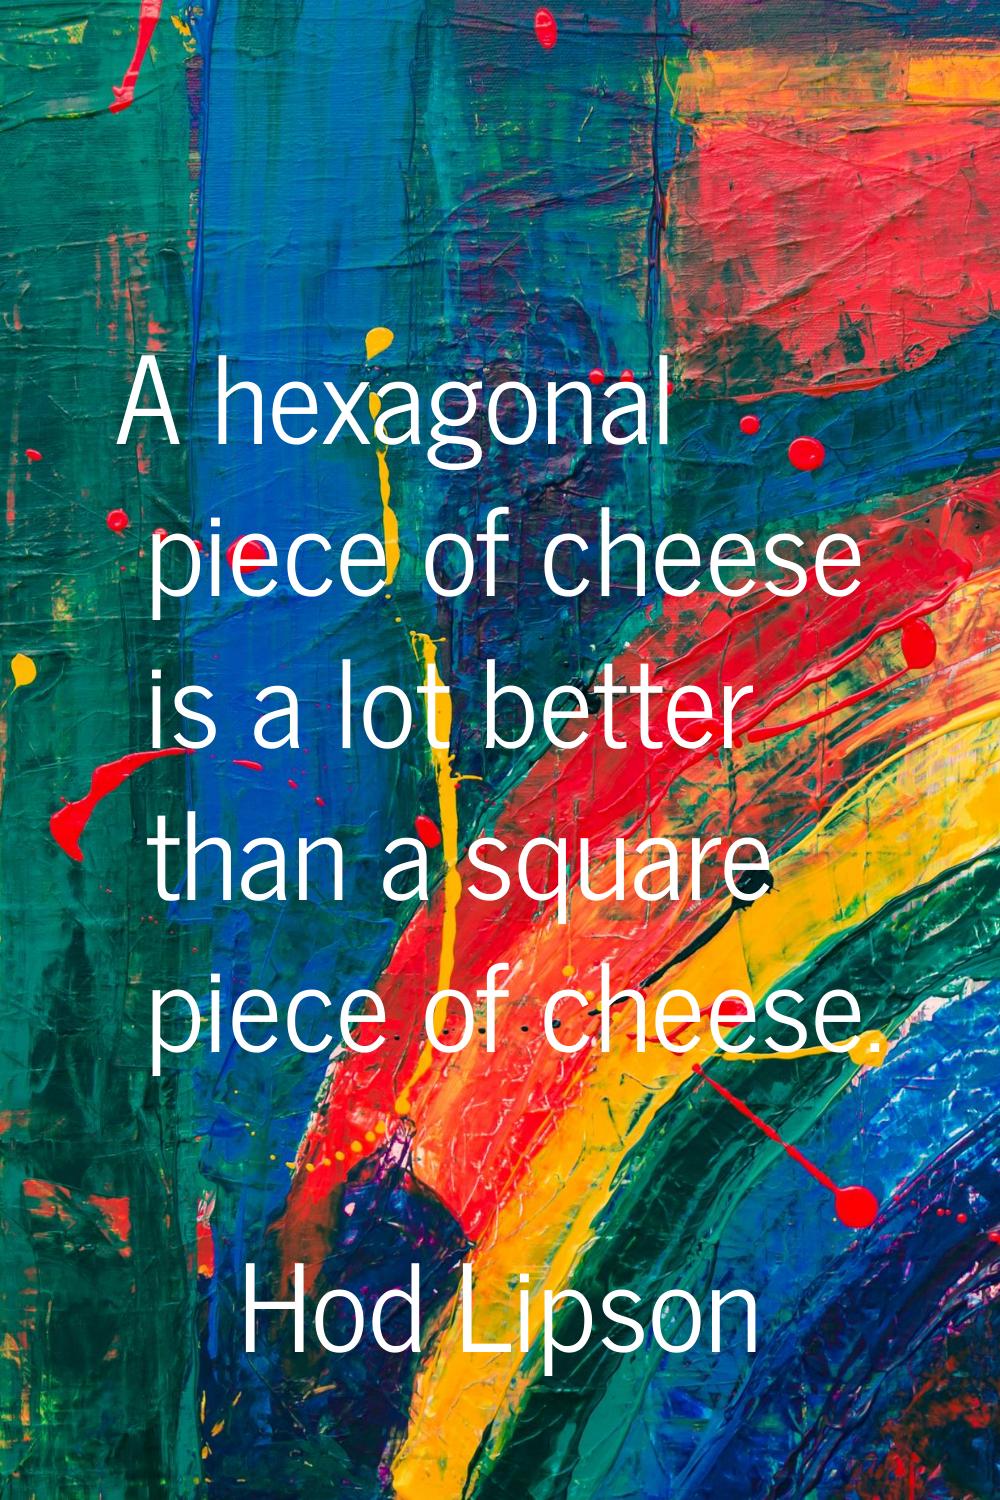 A hexagonal piece of cheese is a lot better than a square piece of cheese.